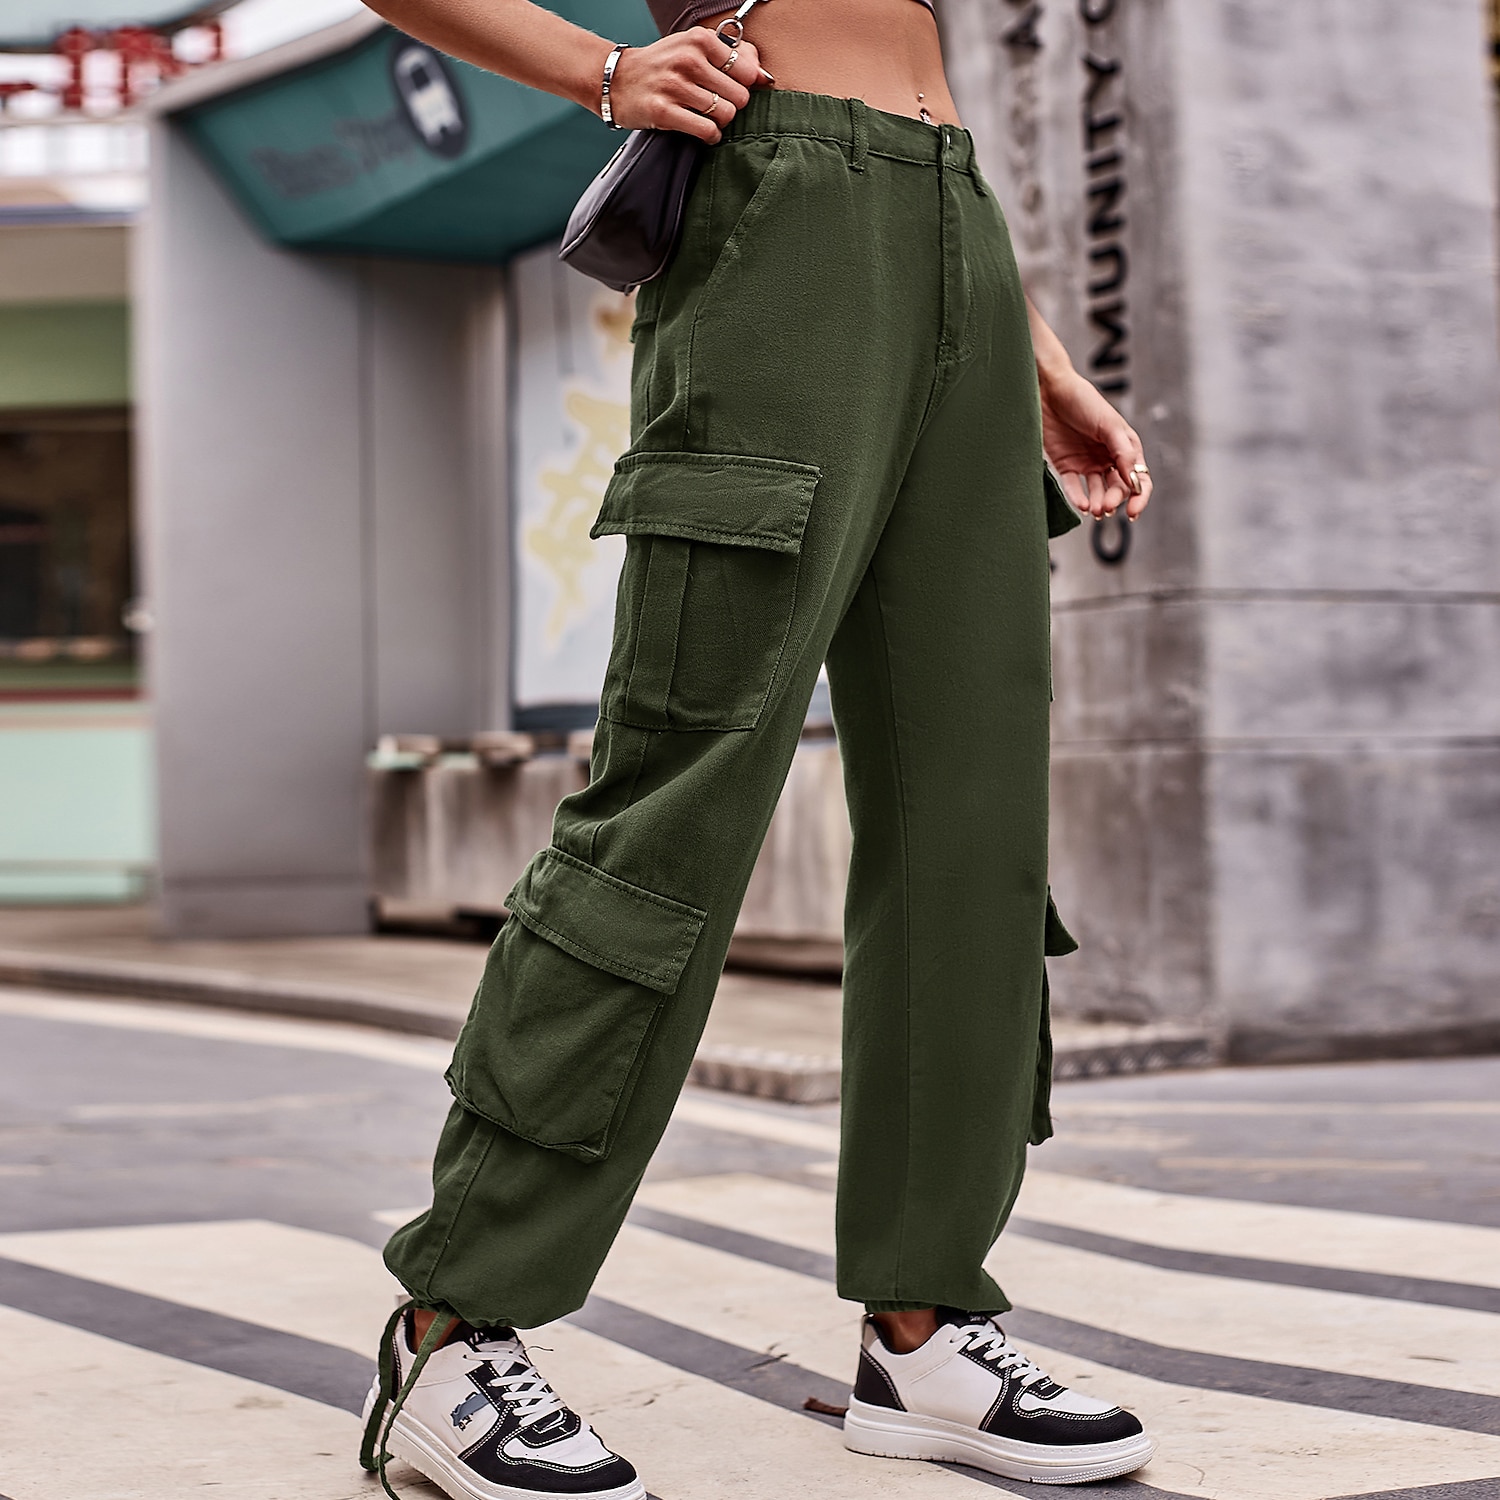 Women's Cargo Pants Hiking Pants Trousers Outdoor Regular Fit Breathable  Quick Dry Sweat wicking Comfortable Bottoms 8 Pockets Black Army Green  Spandex Fishing Camping / Hiking / Caving Traveling S M 2024 - $32.99